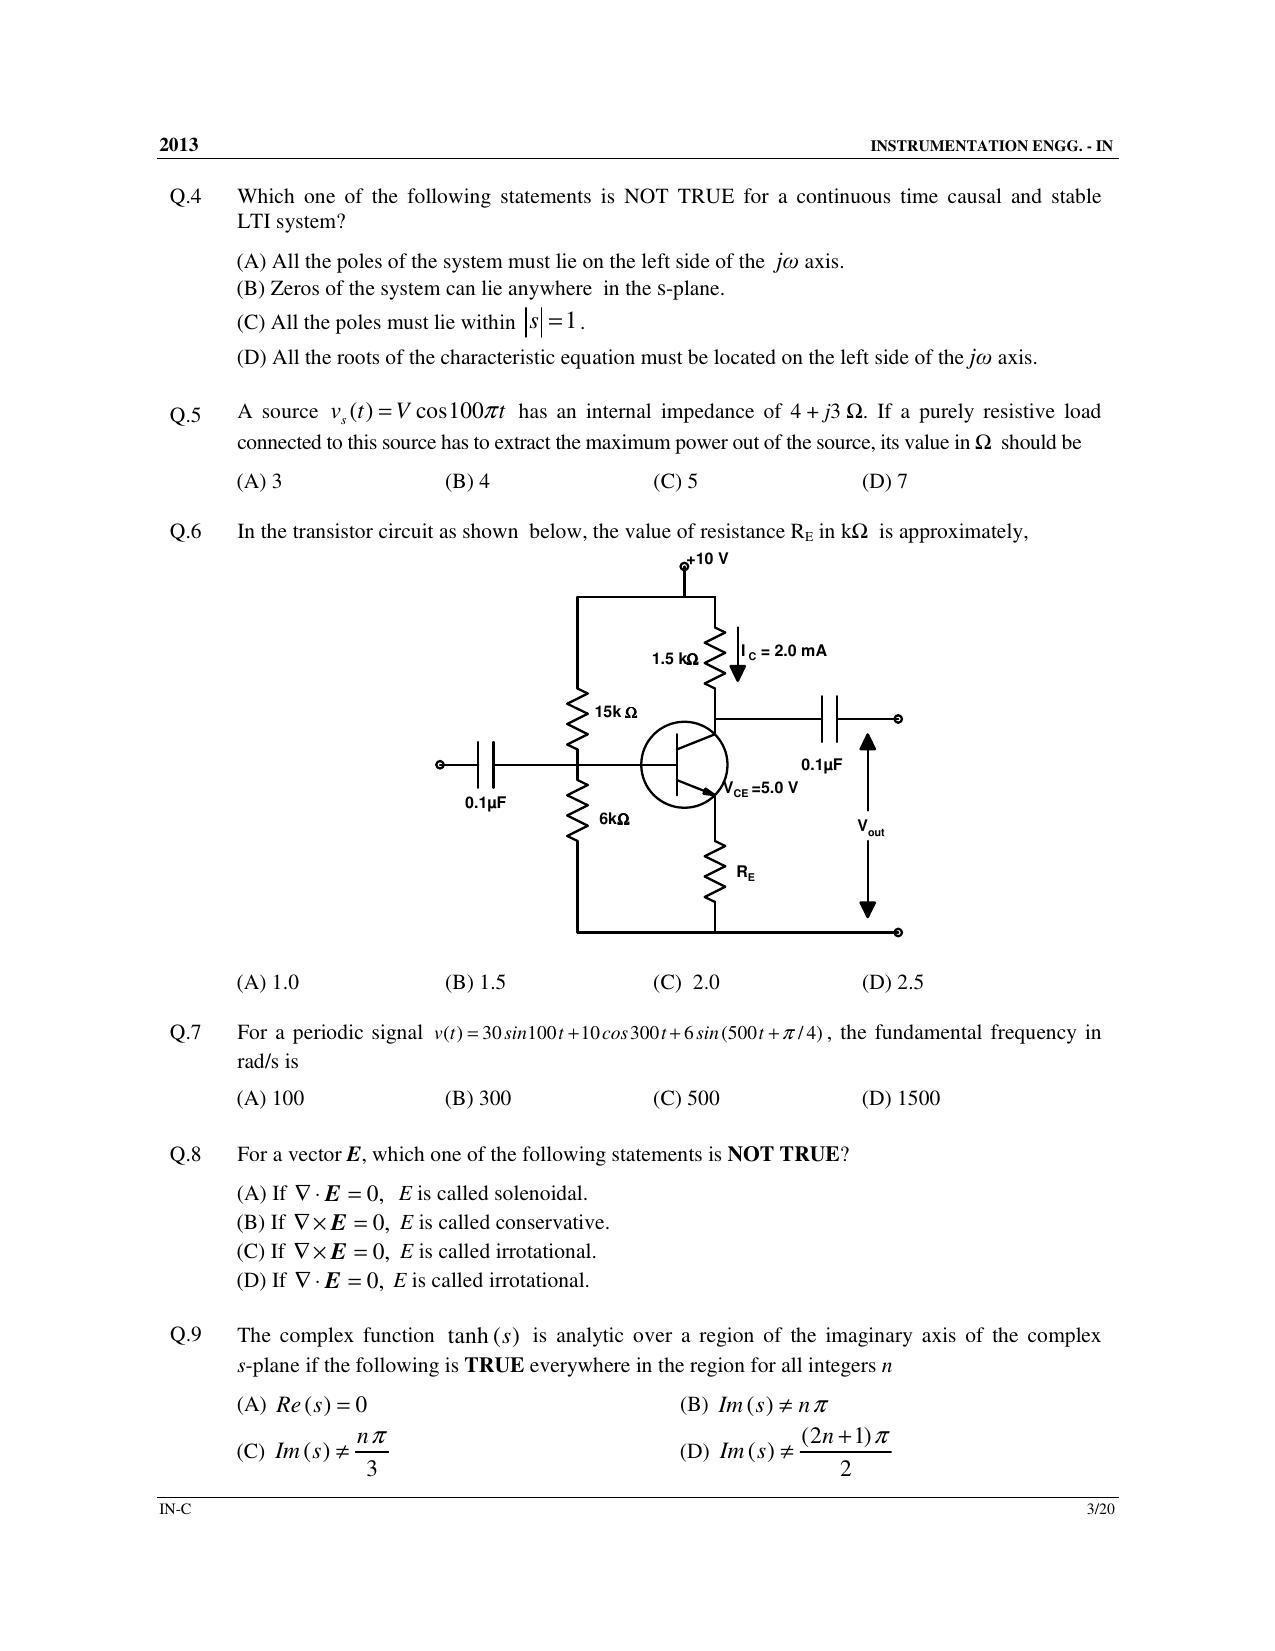 GATE 2013 Instrumentation Engineering (IN) Question Paper with Answer Key - Page 38